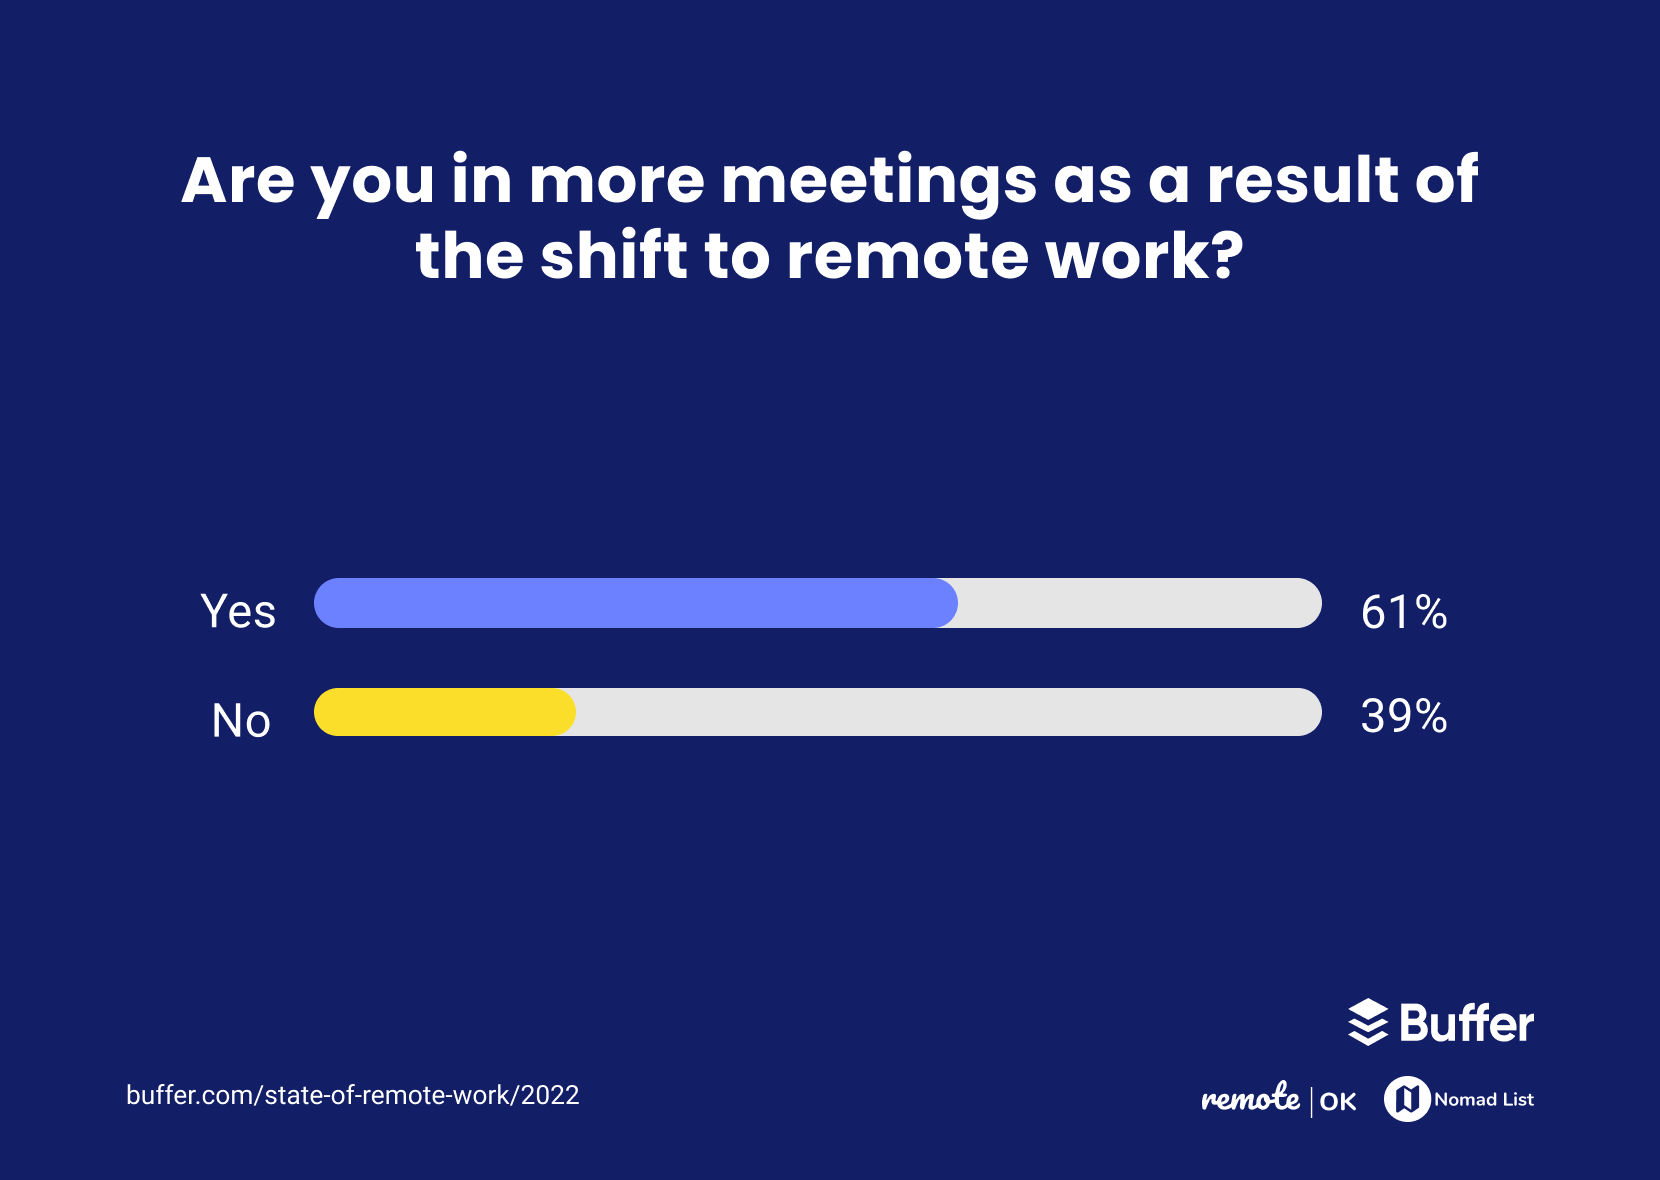 Are you in more meetings as a result of the shift to remote work?